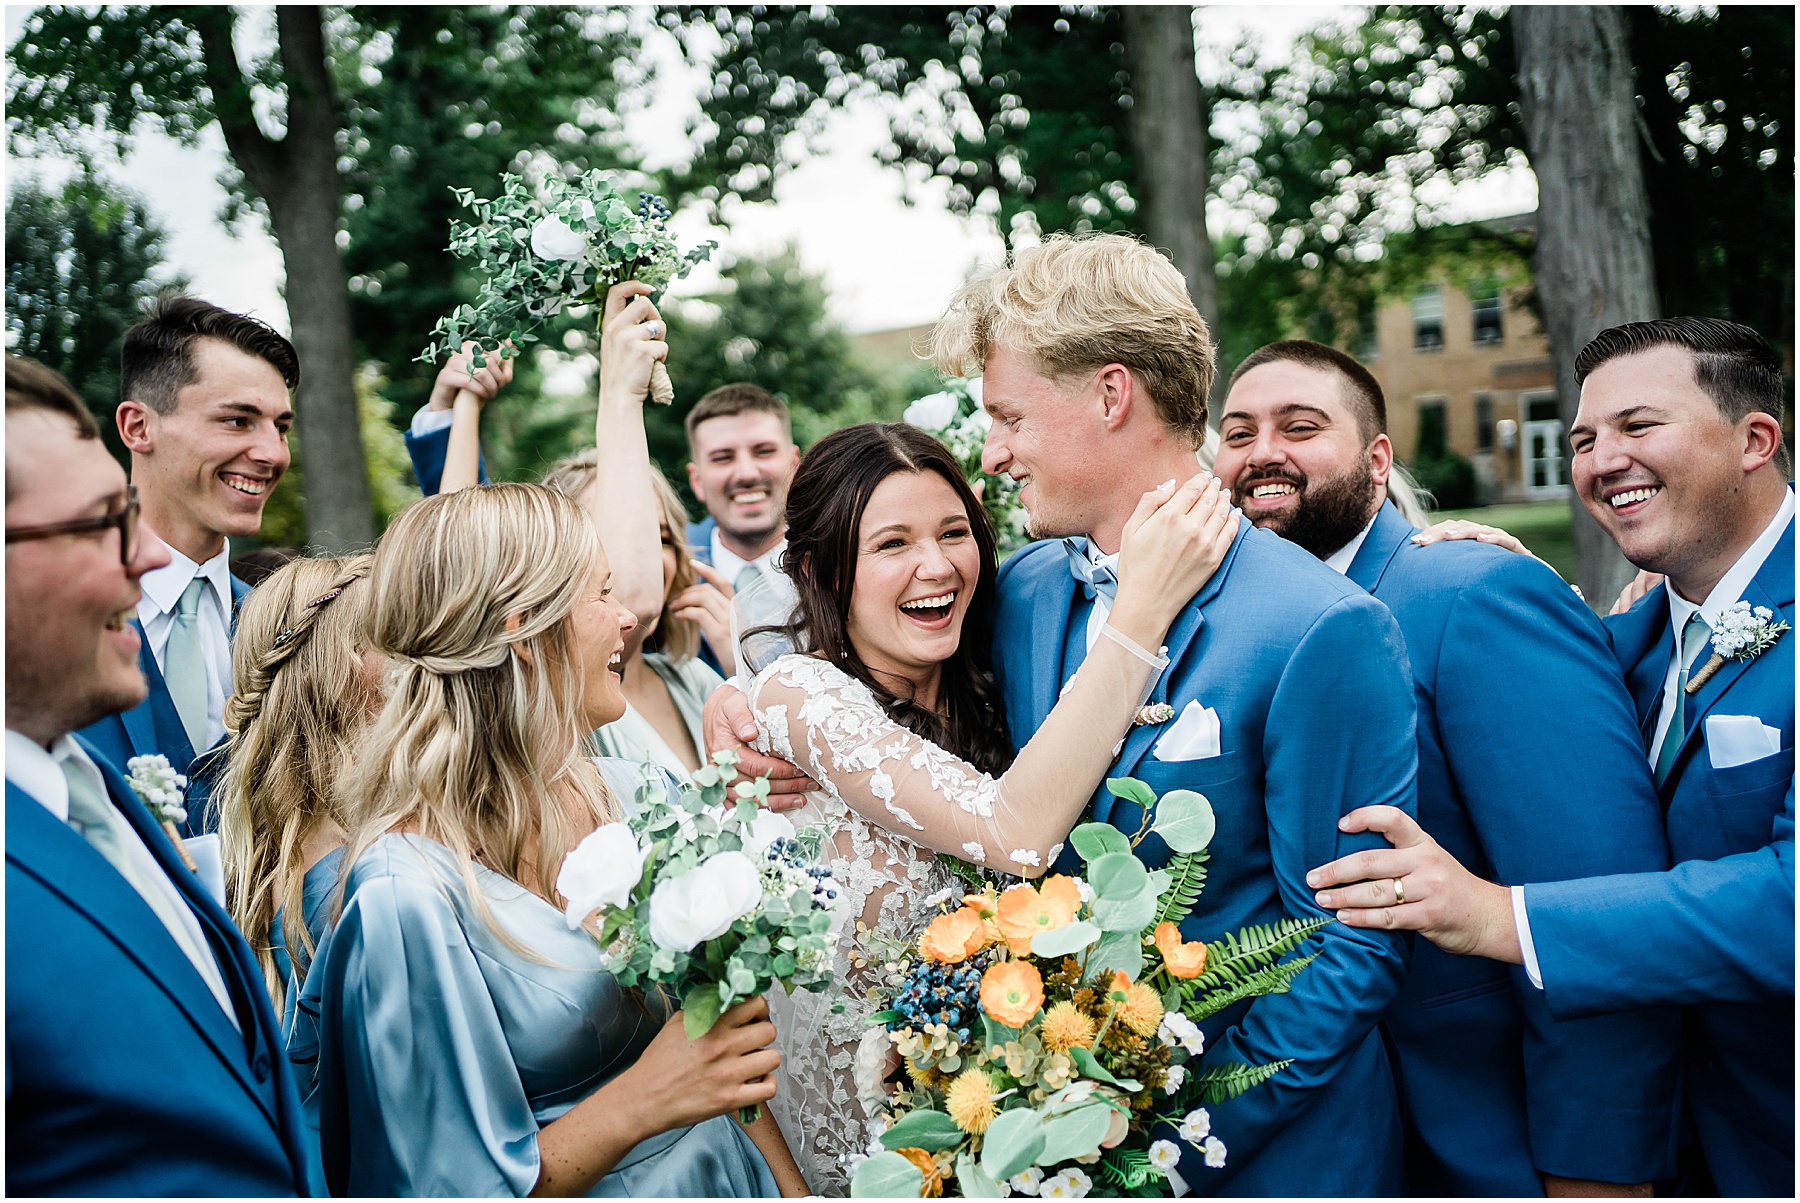 Fort Wayne wedding photographers capture bride and groom laughing together with wedding party